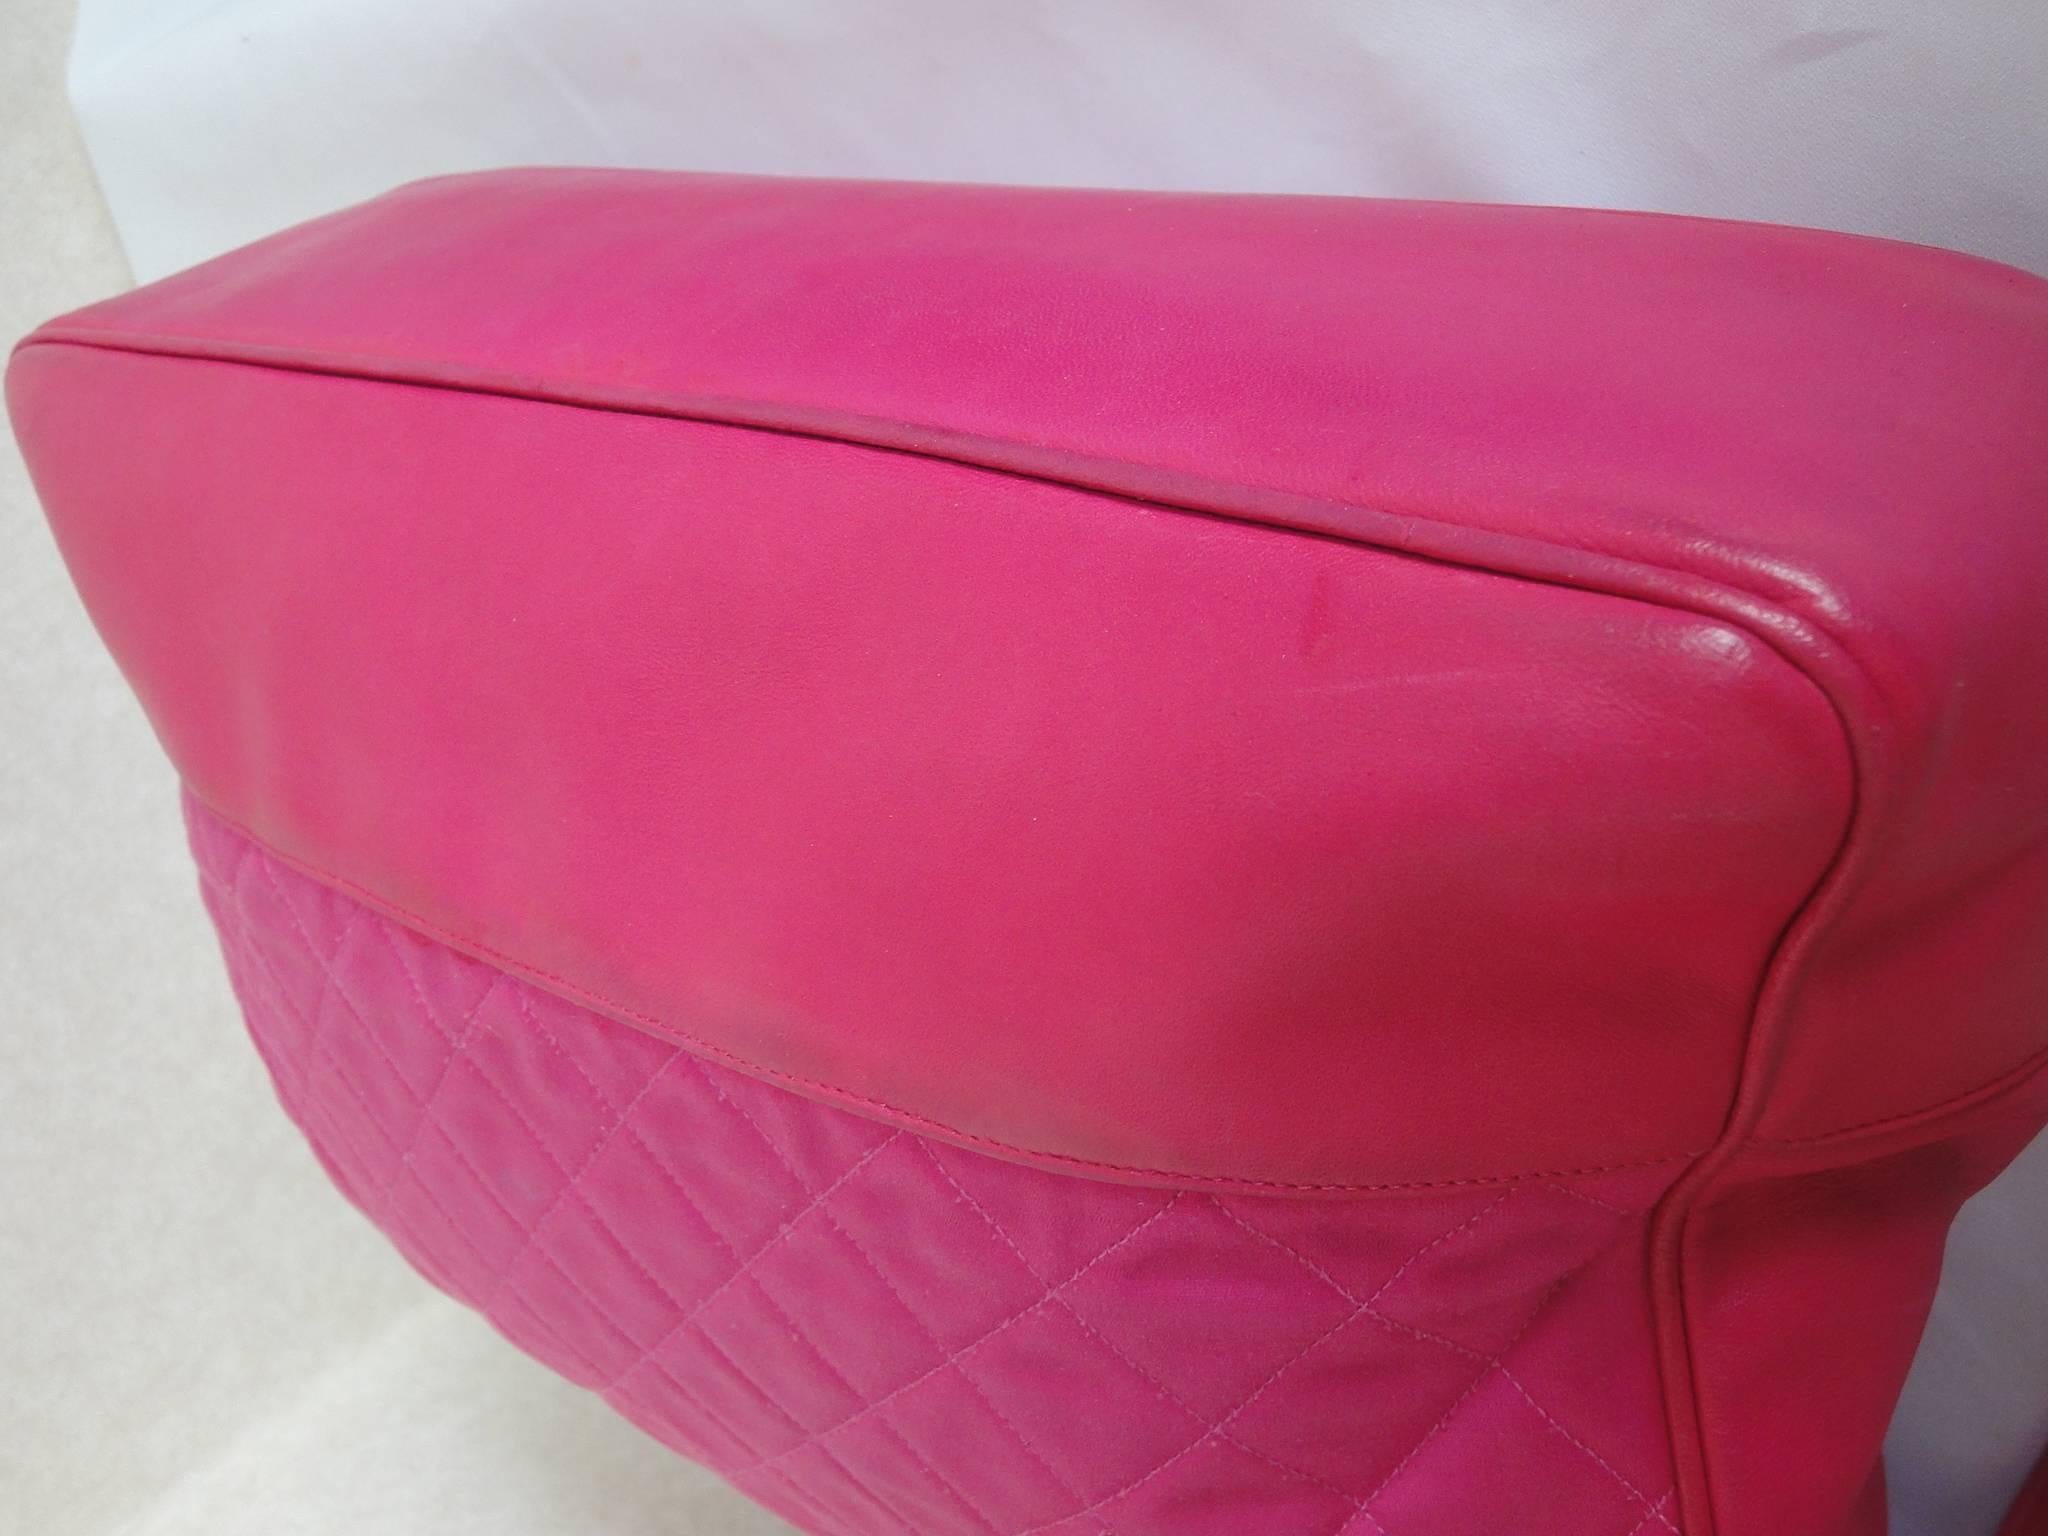 Women's Vintage CHANEL bright pink shoulder tote bag with quilted satin and leather